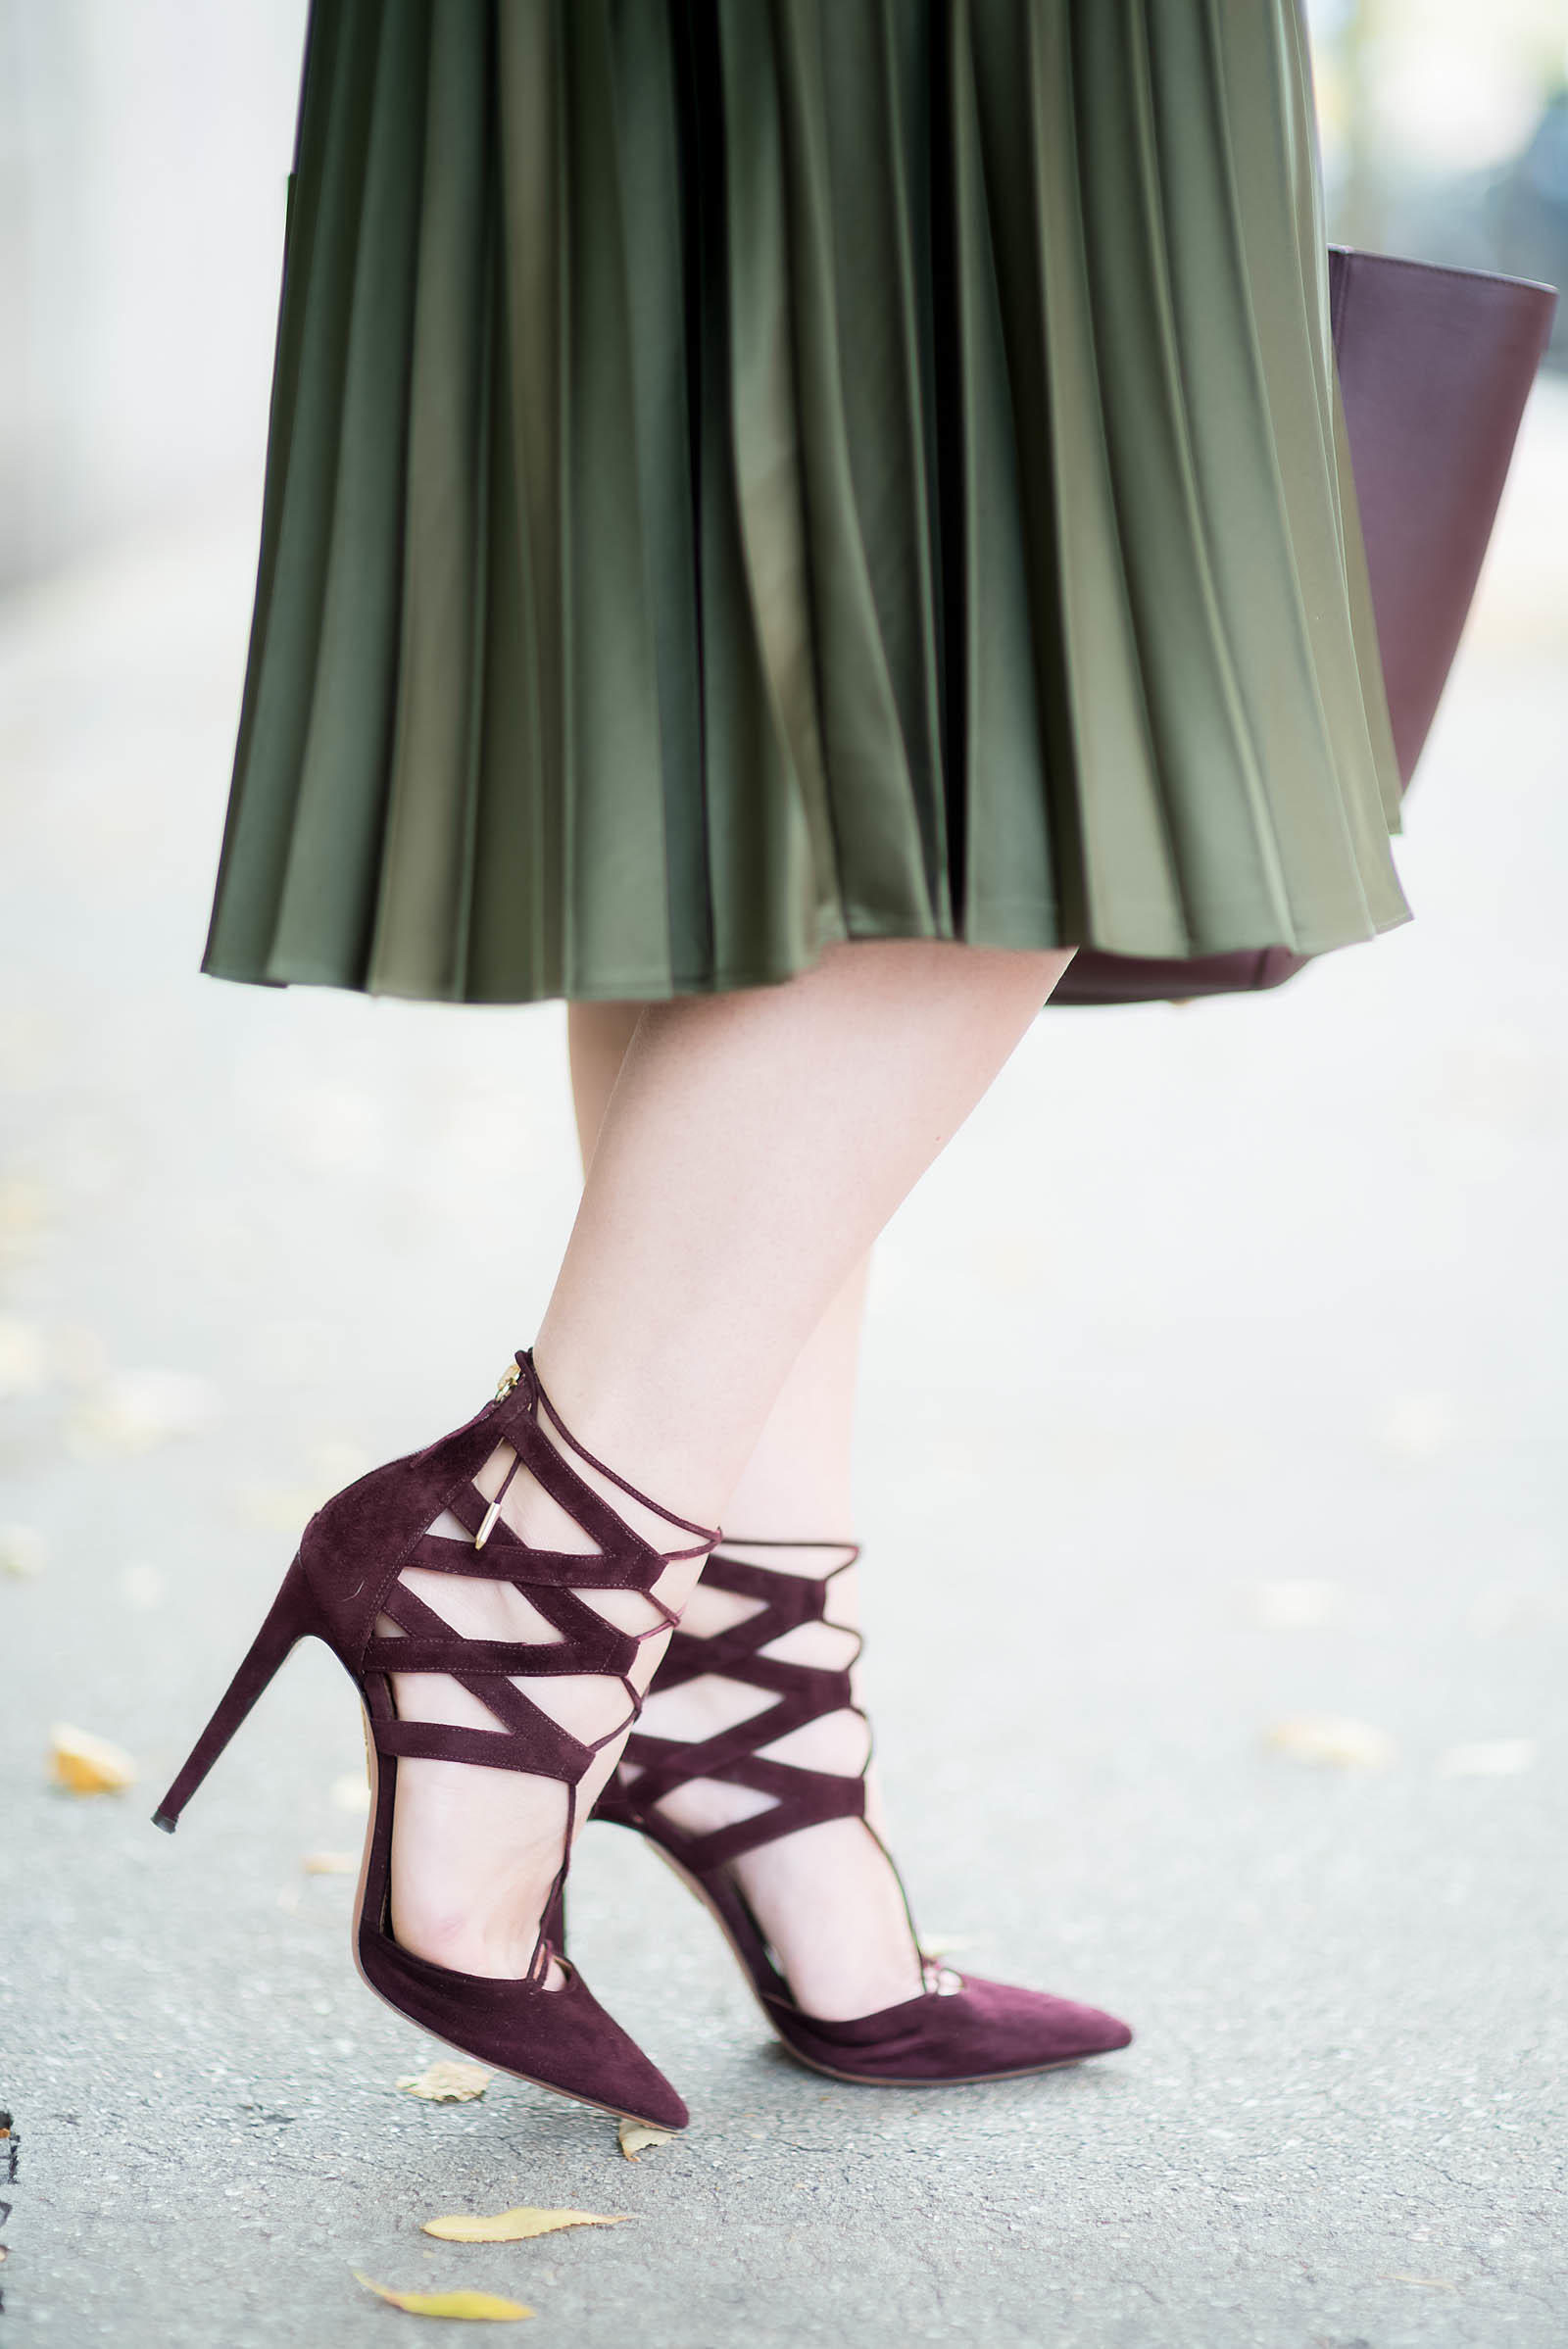 Green Oxblood Fall Pleated Skirt Outfit